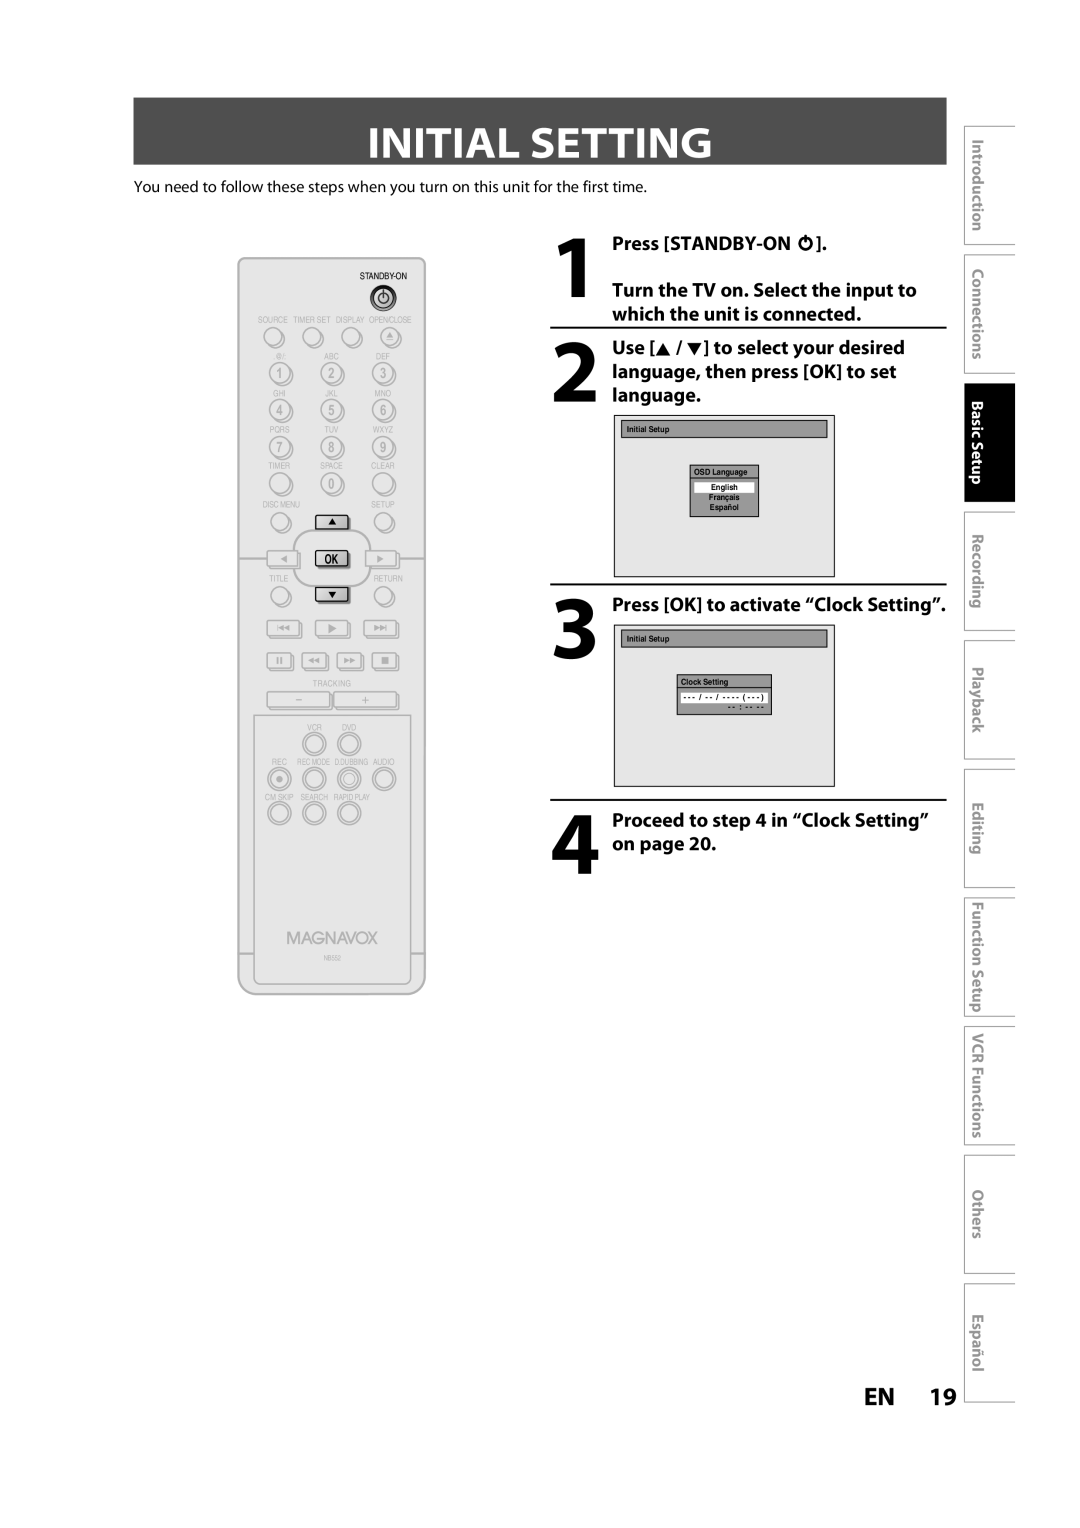 FUNAI BZV420MW8 Initial Setting, Press STANDBY-ON y, Turn the TV on. Select the input to which the unit is connected 